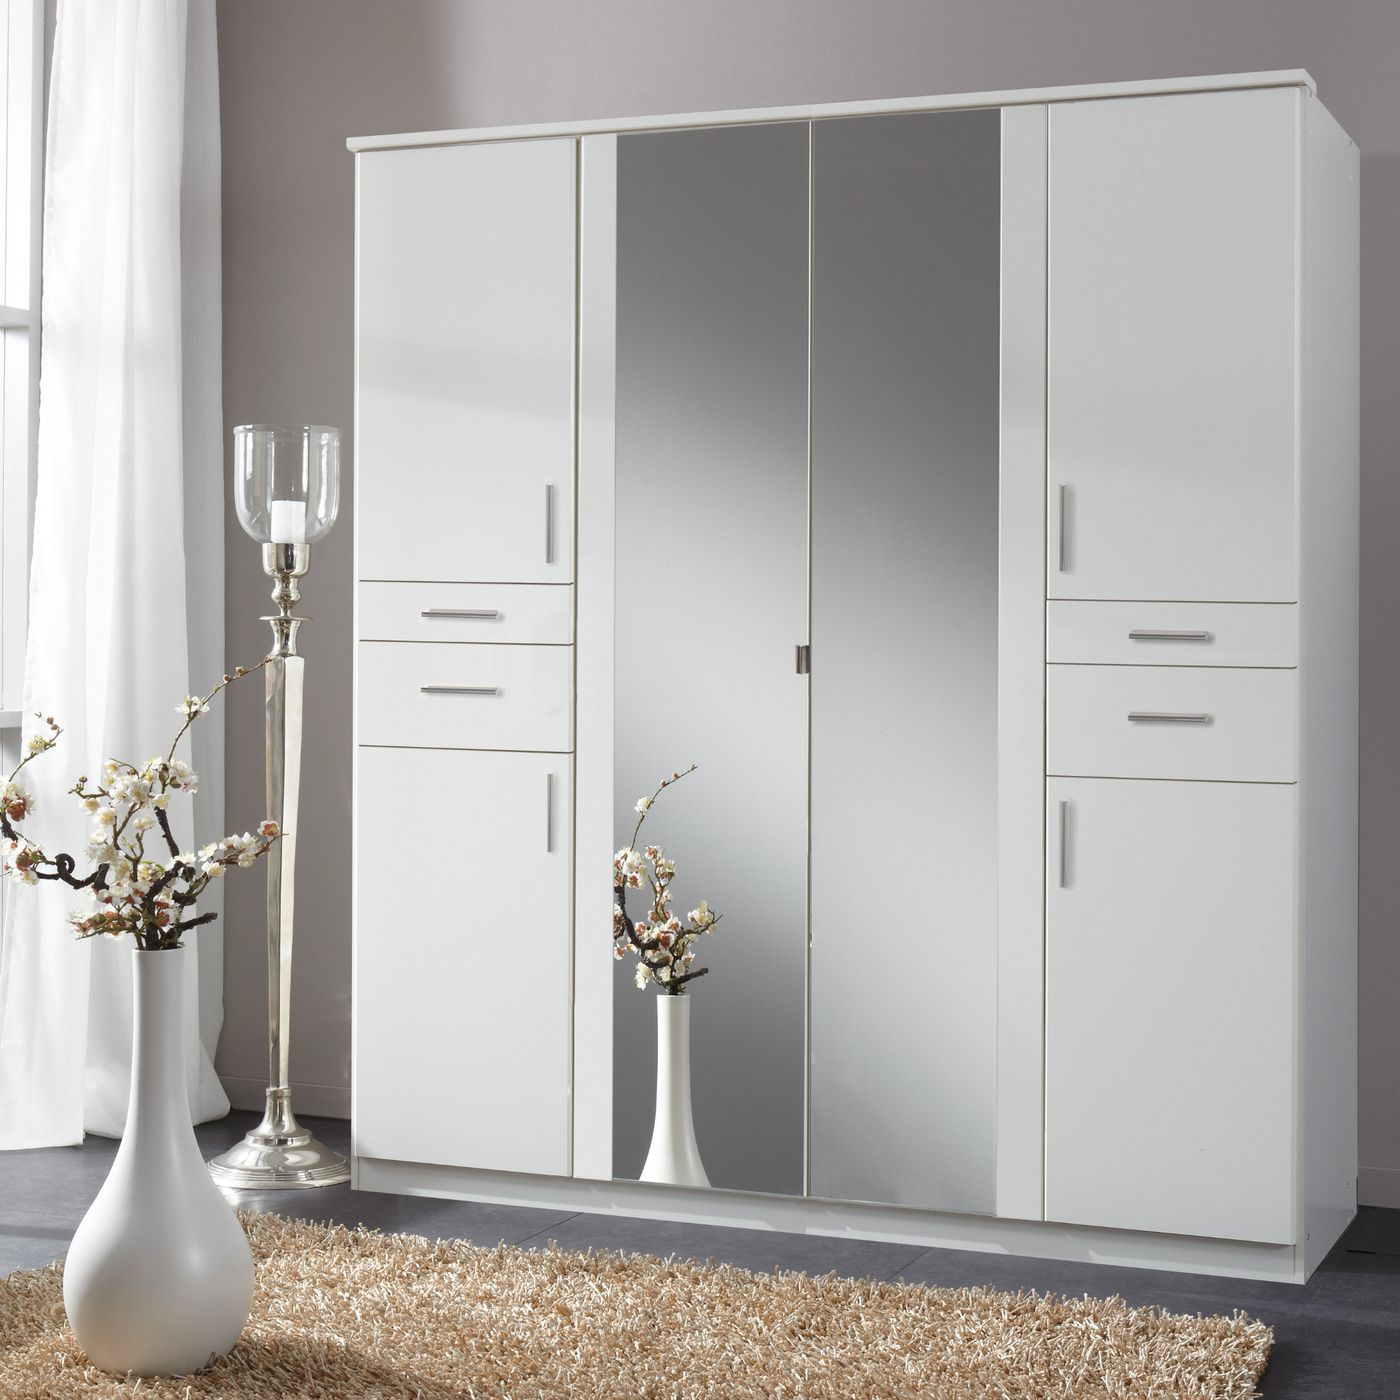 Rivera White Wardrobe 4 Doors & 4 Drawers And 2 Mirrors Throughout 4 Door White Wardrobes (Gallery 4 of 20)